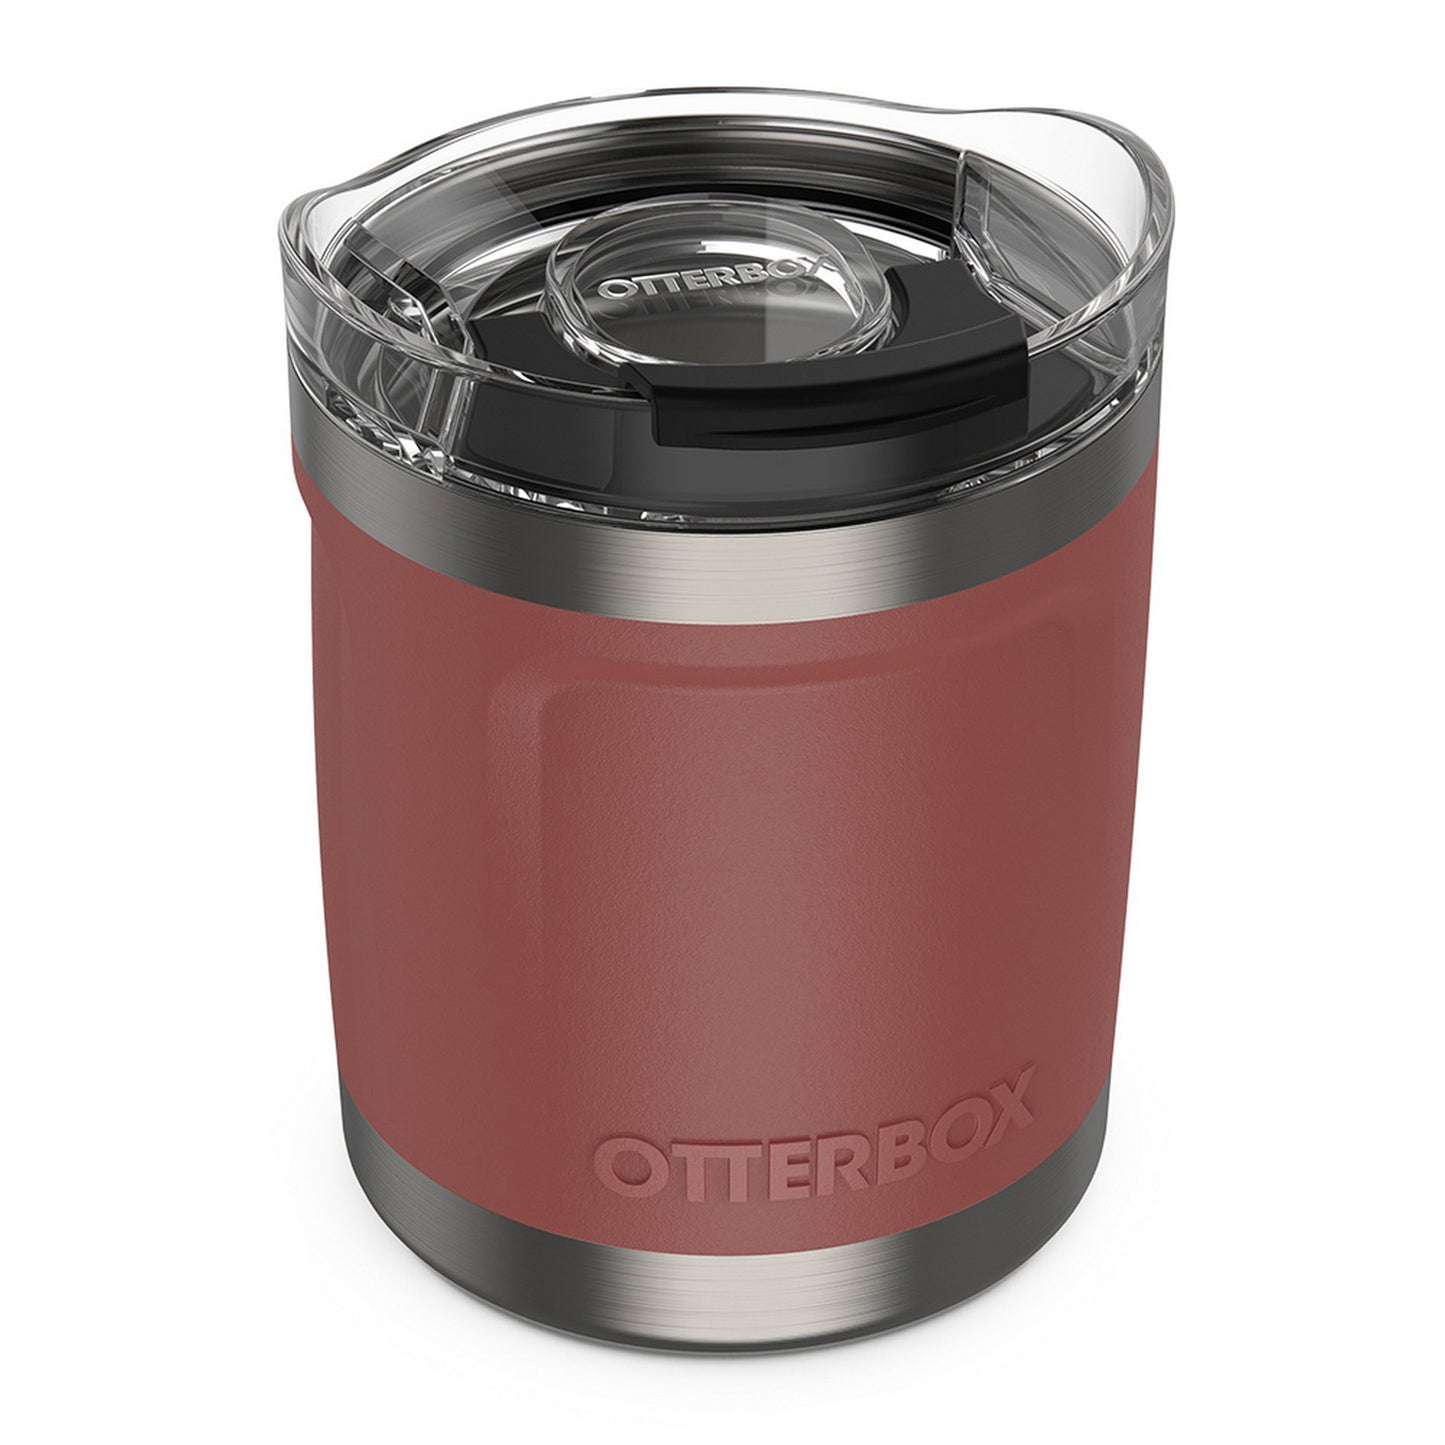 Otterbox 10oz Elevation Tumbler w/Closed Lid - Red/Silver (Baked Mud) - 15-11824